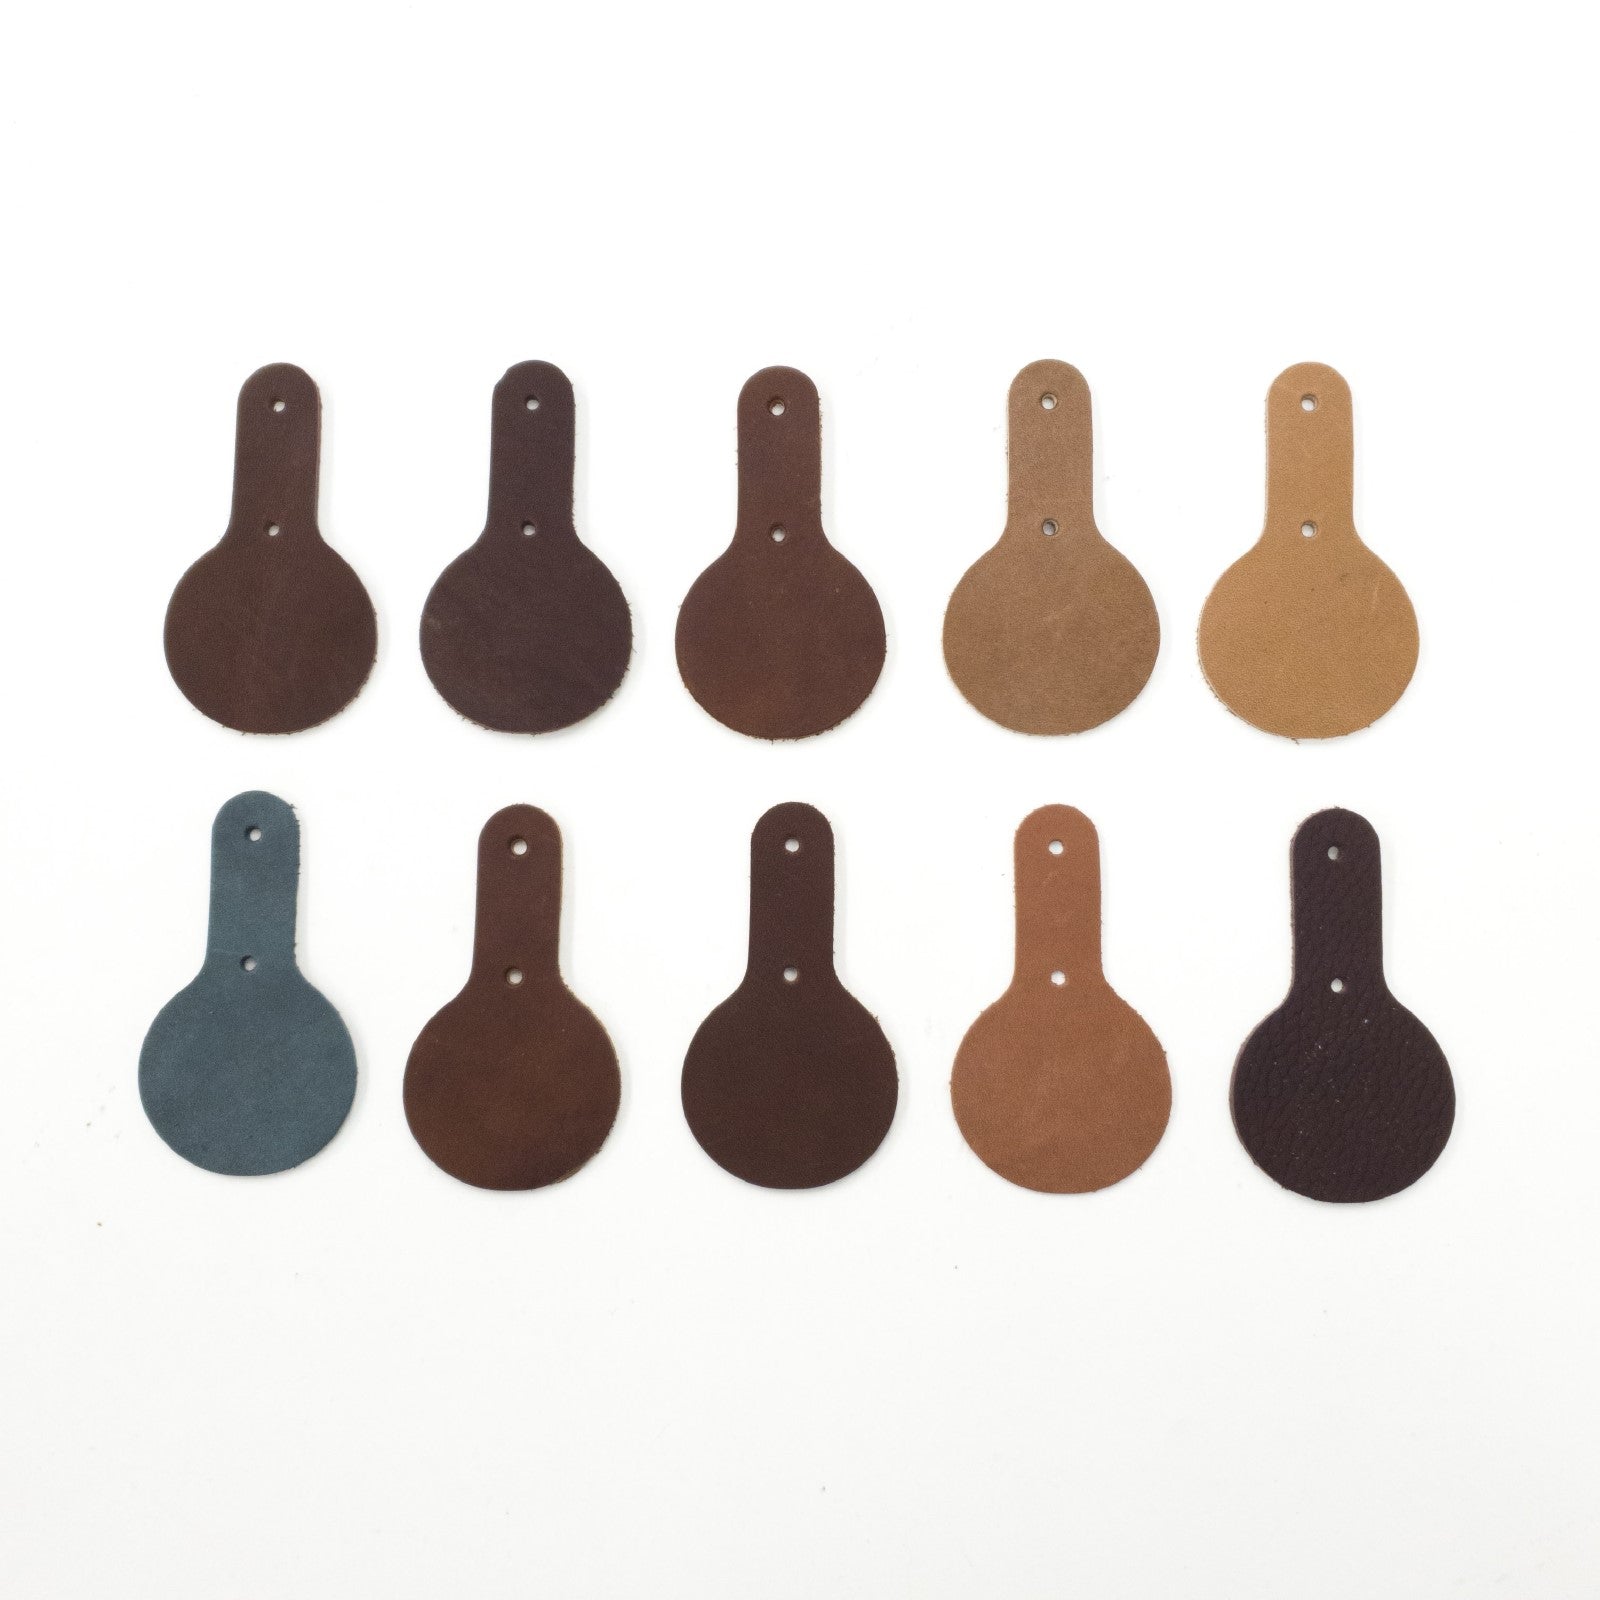 Miscellaneous Oil Tanned Key Fob Packs, Round / 10 PK | The Leather Guy